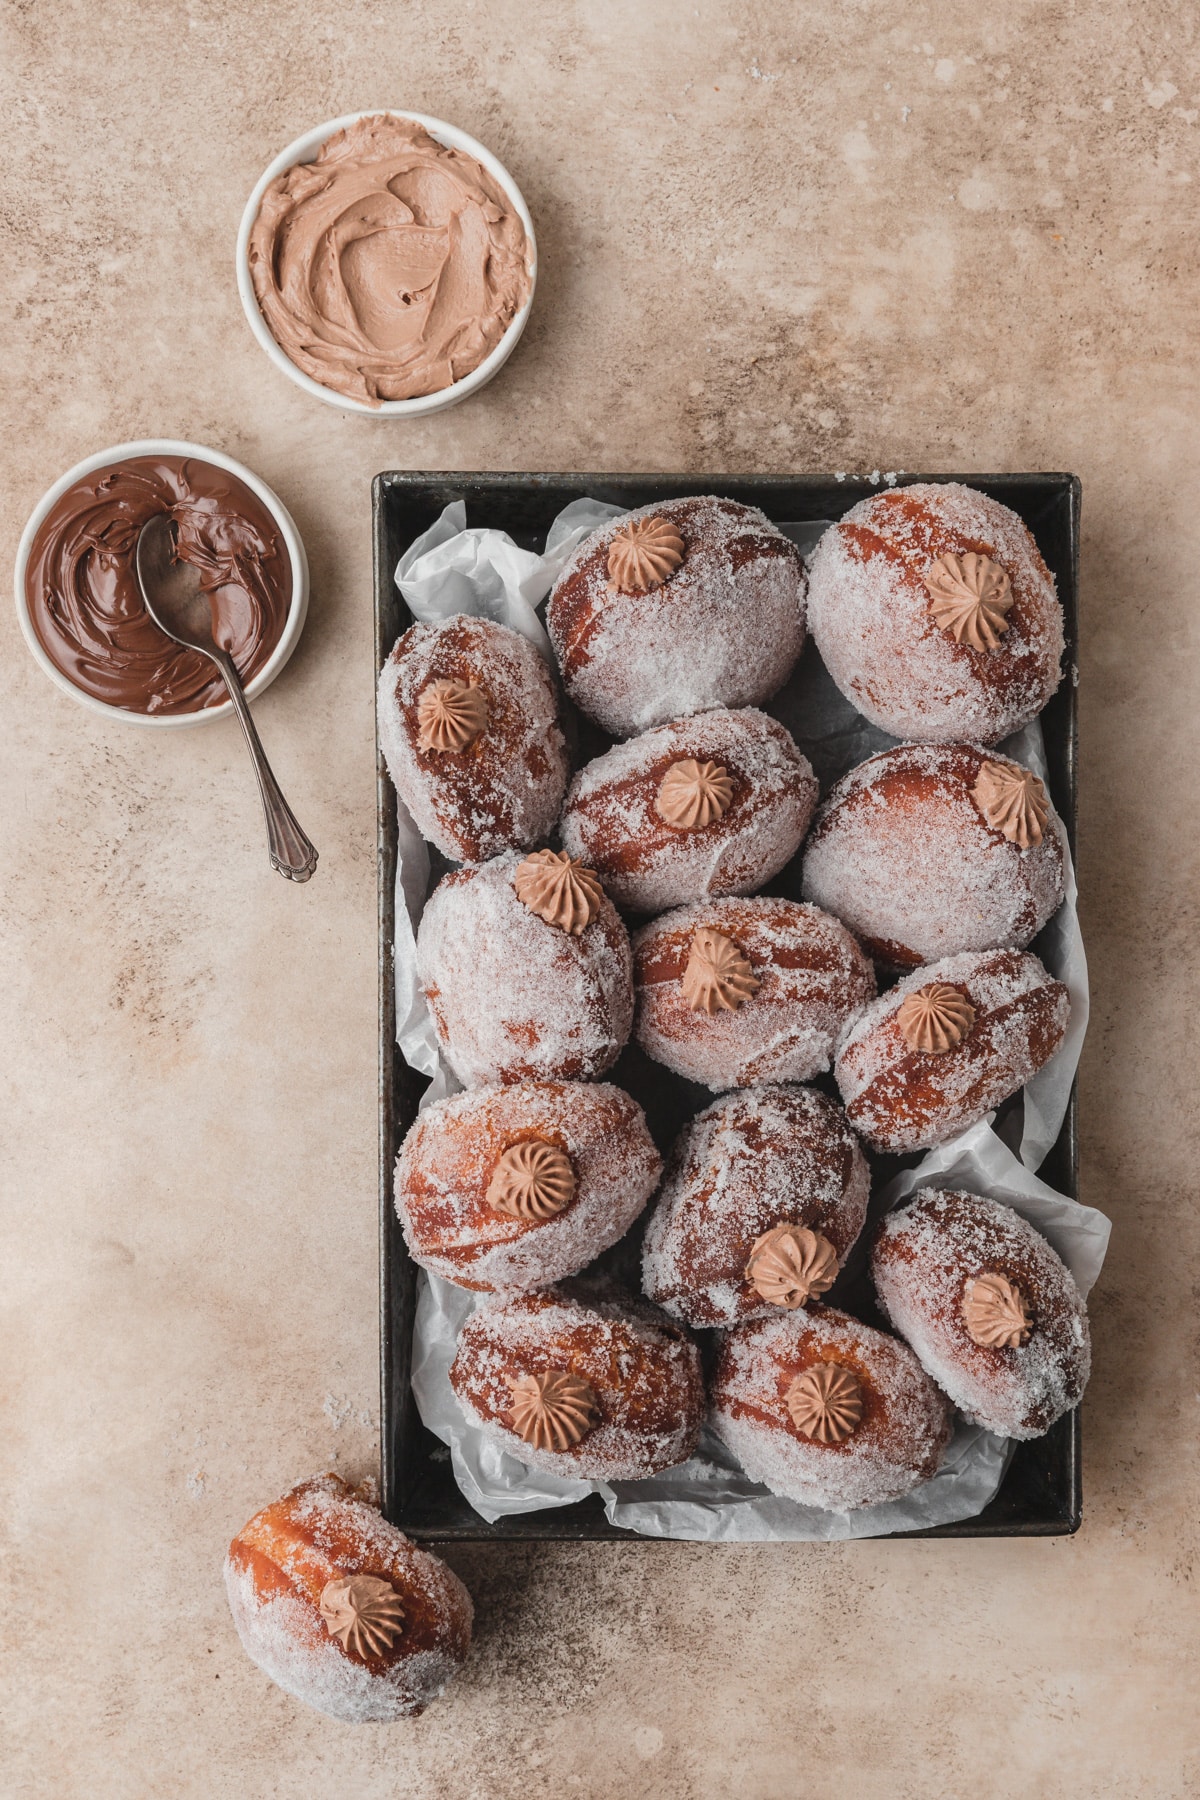 deep fried donuts filled with nutella buttercream.